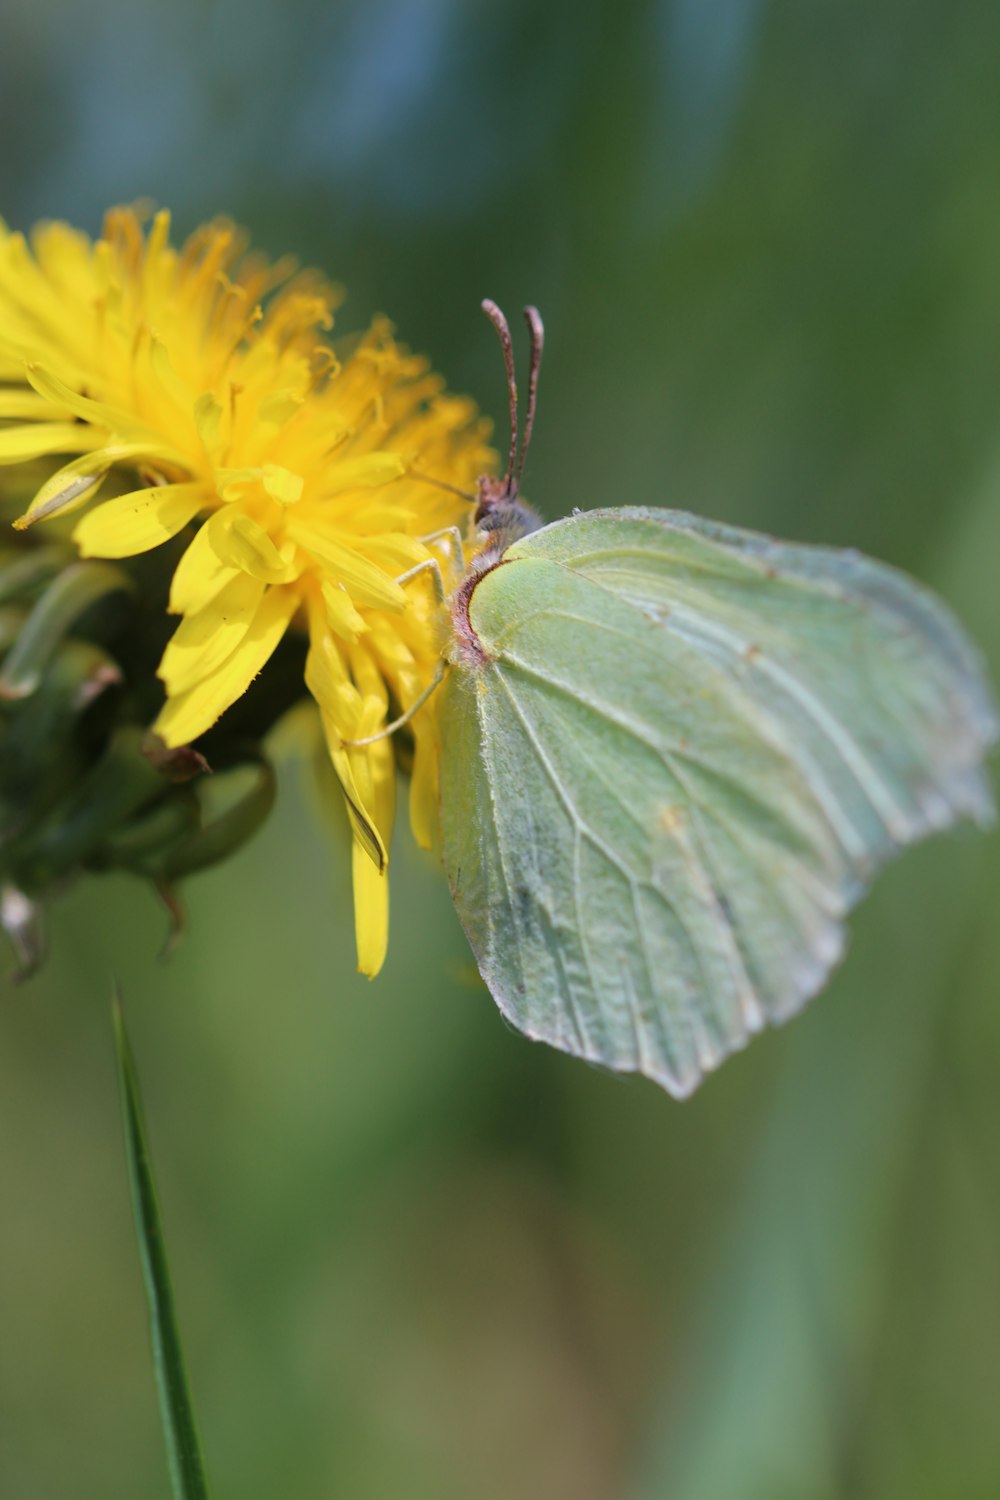 yellow butterfly perched on yellow flower in close up photography during daytime